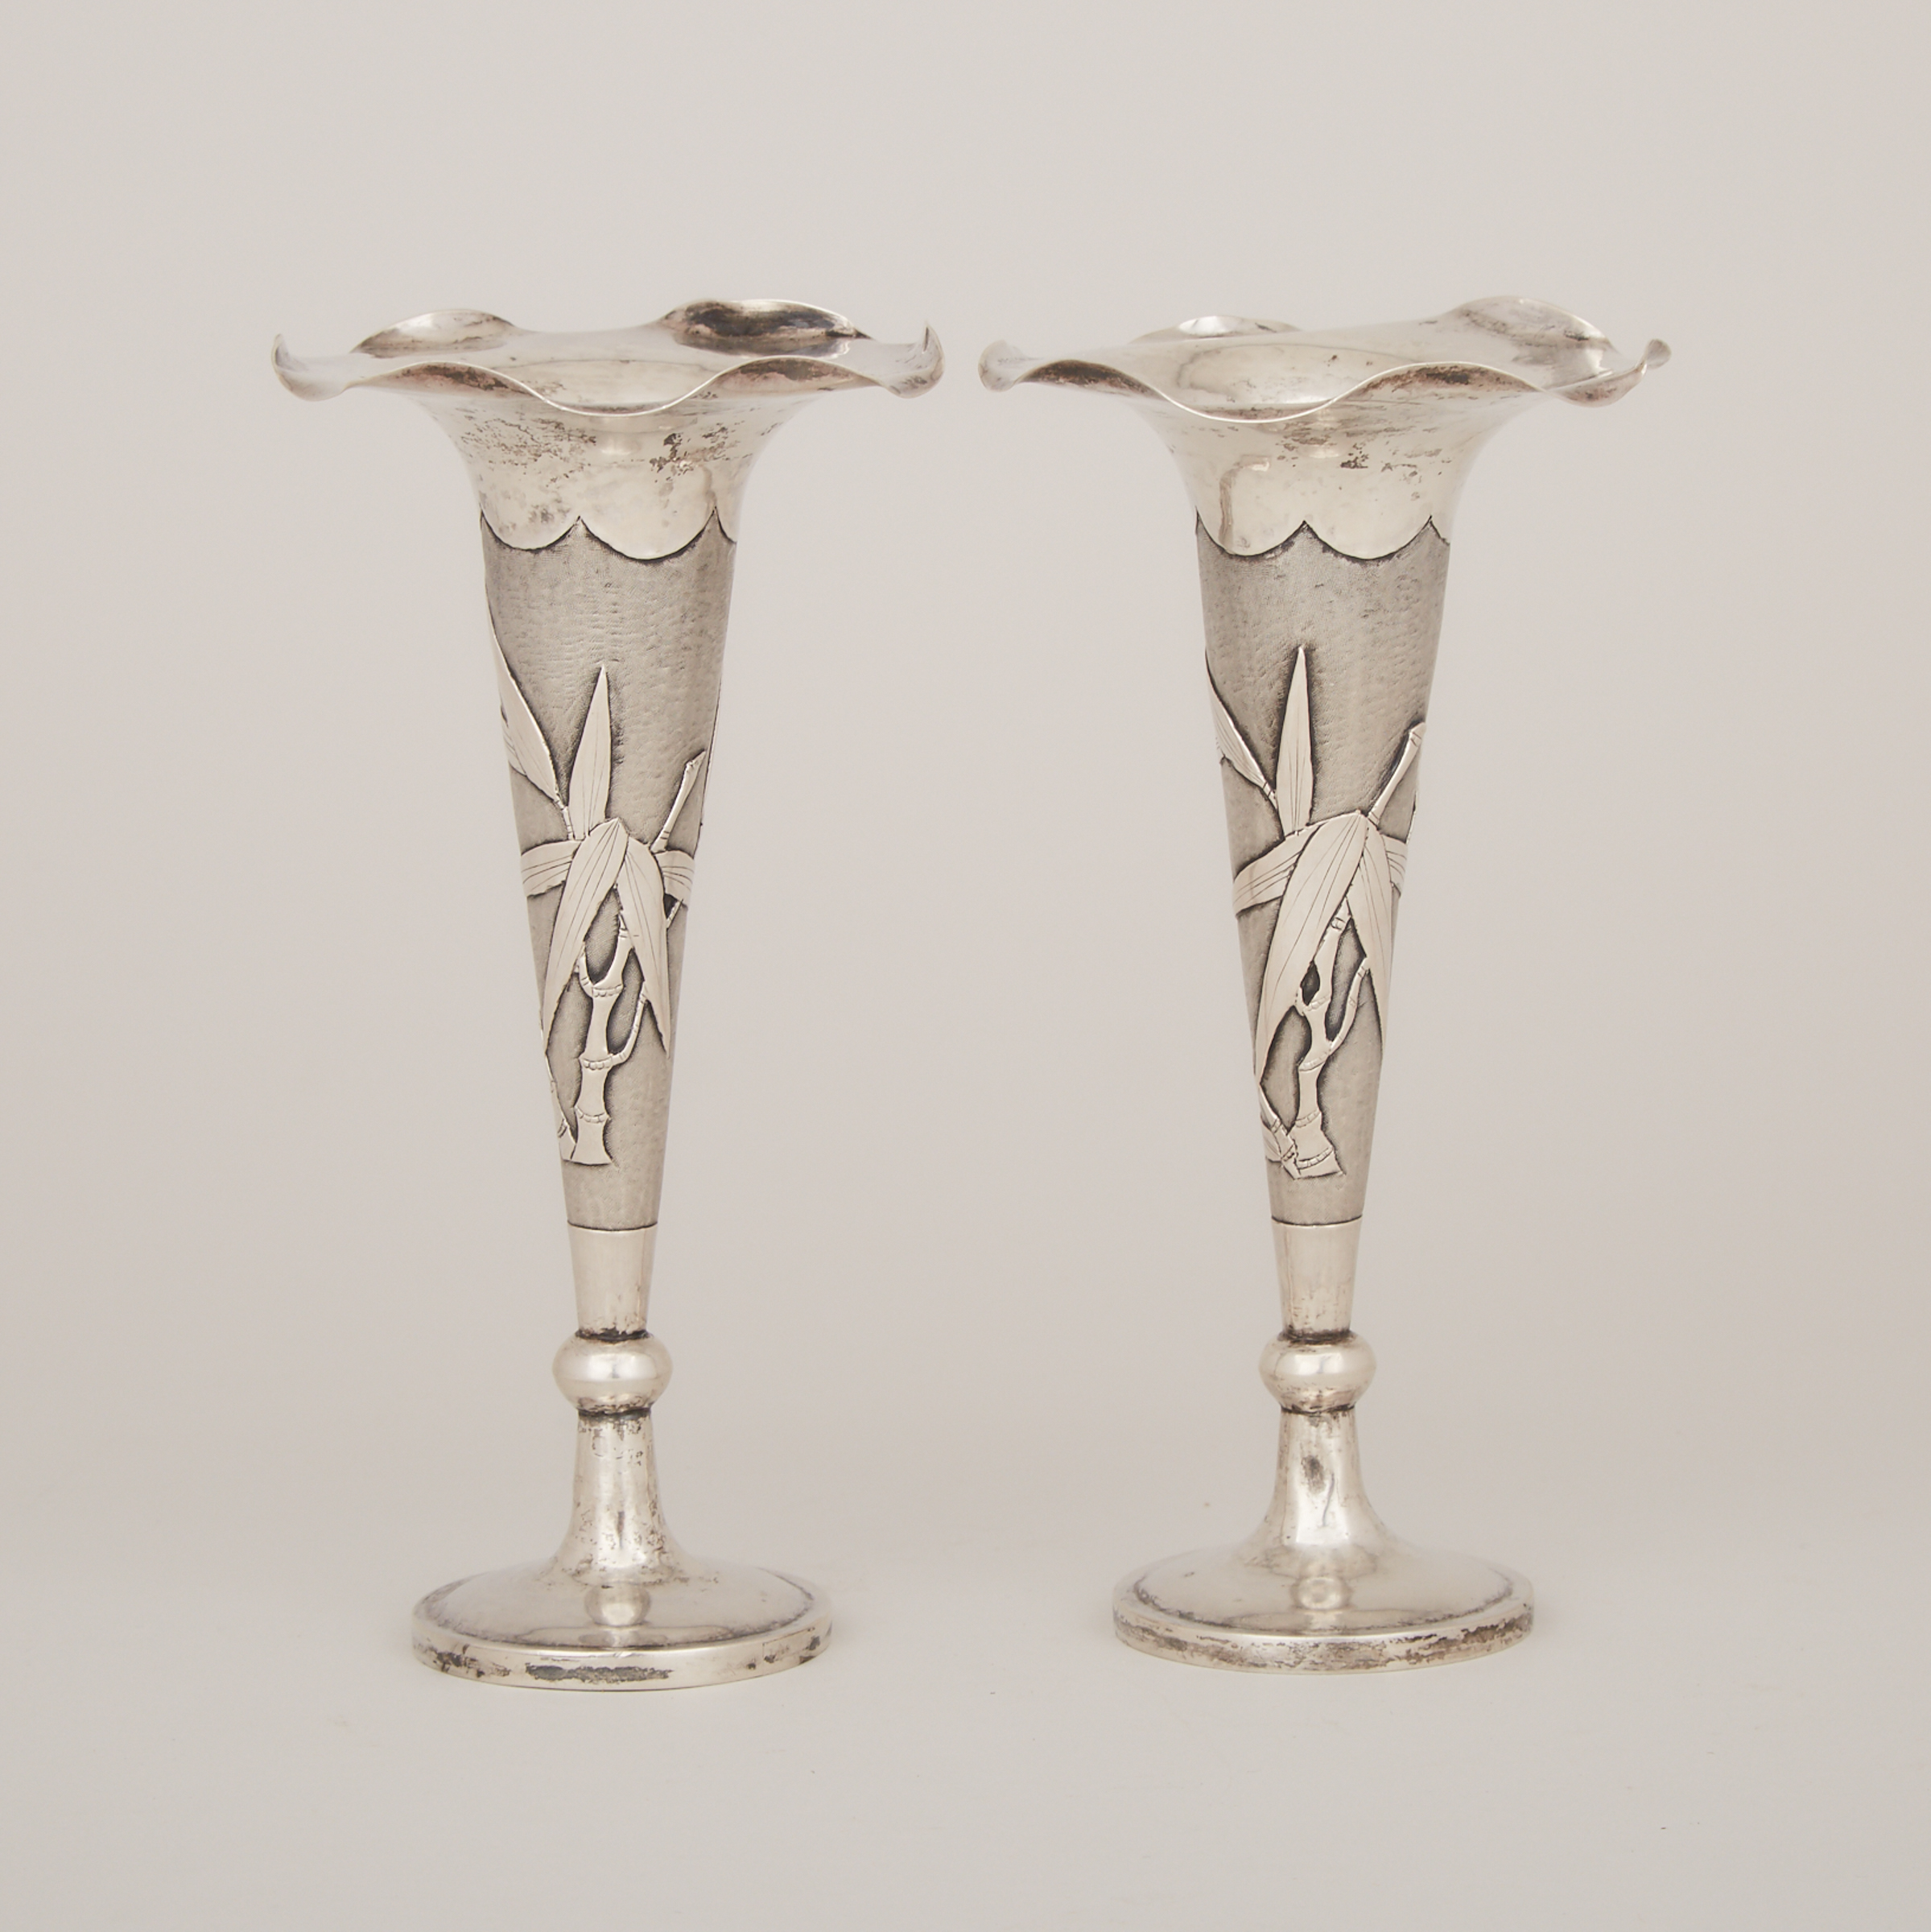 A Pair of Chinese Sterling Silver Bud Vases, Late Qing/Republican Period